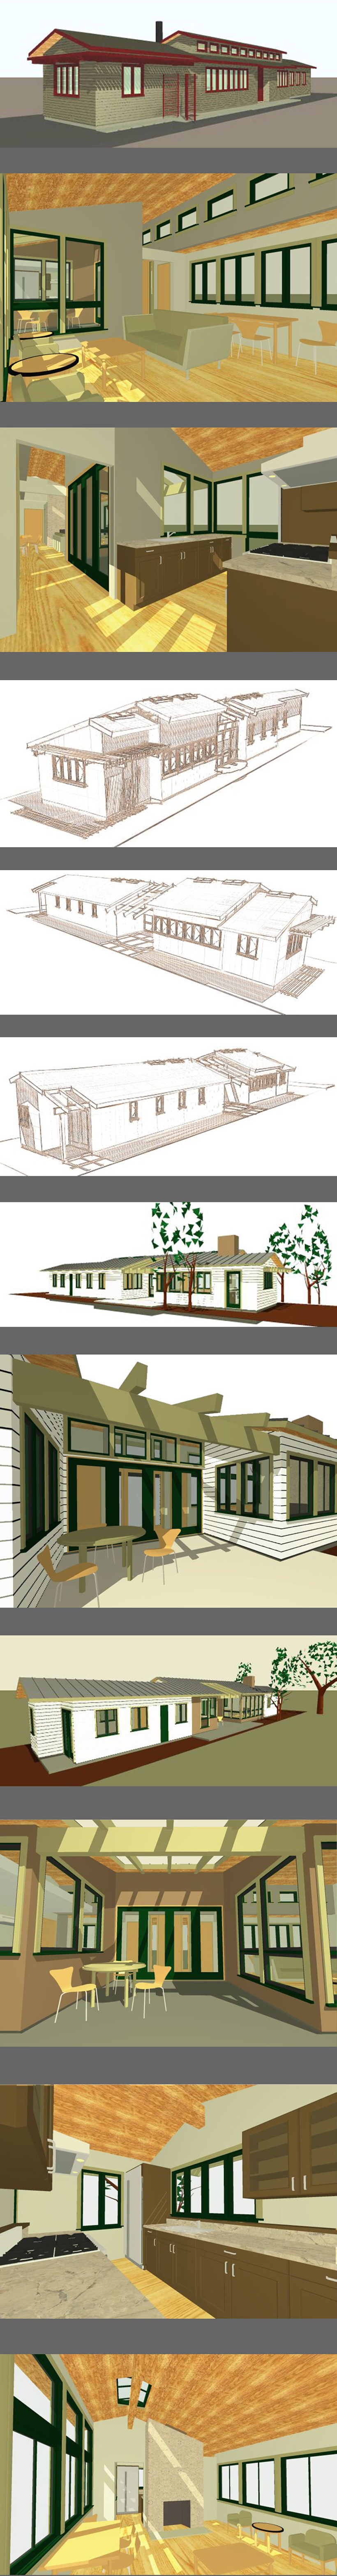 Faculty House, ENR architects with Topos Architects, Palo Alto, CA 94306 - CAD Renderings